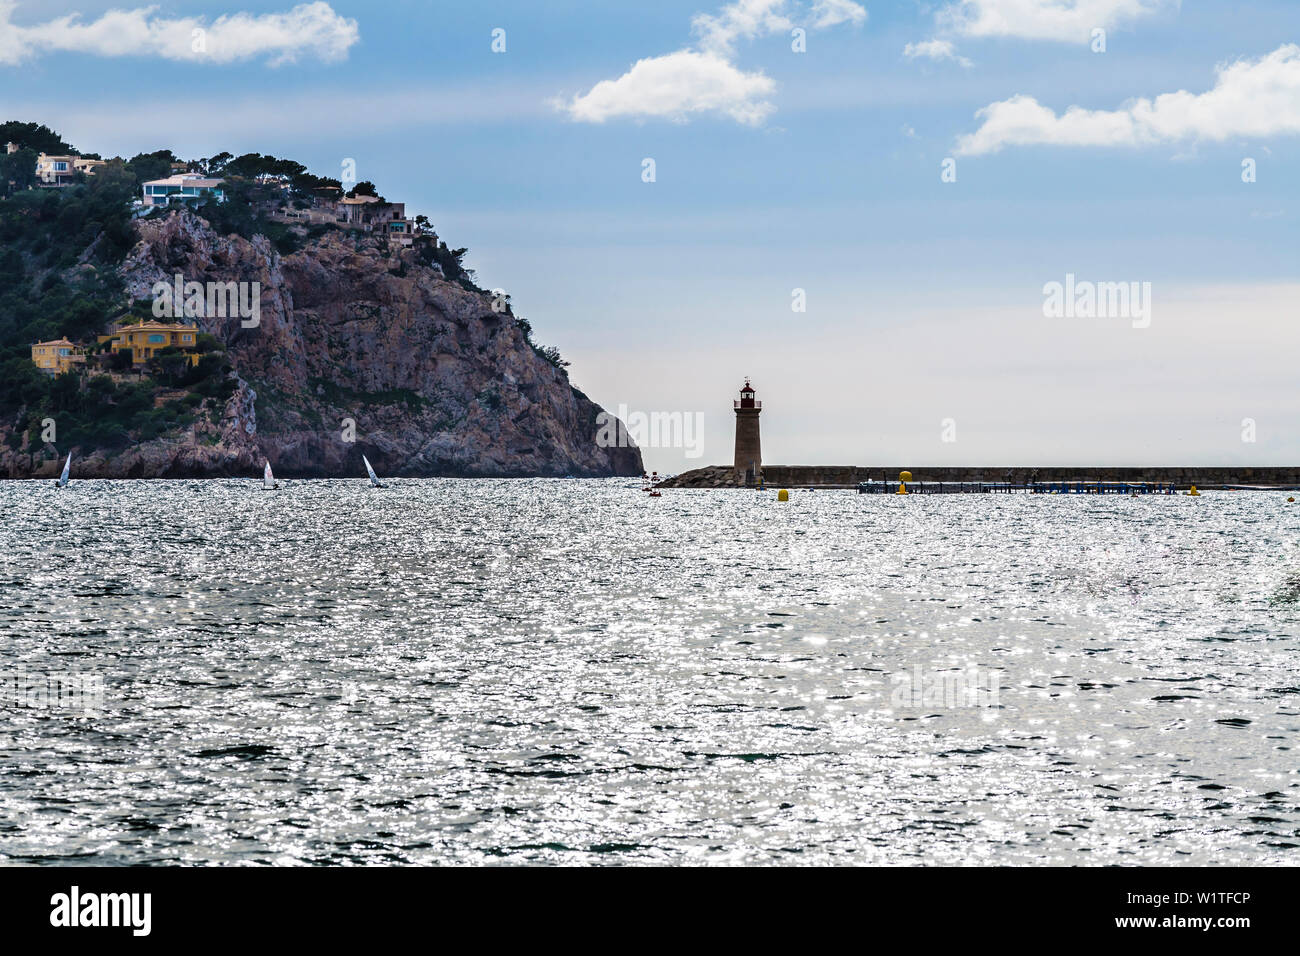 Port exit with lighthouse, Port d'Andratx, Mallorca, Spain Stock Photo